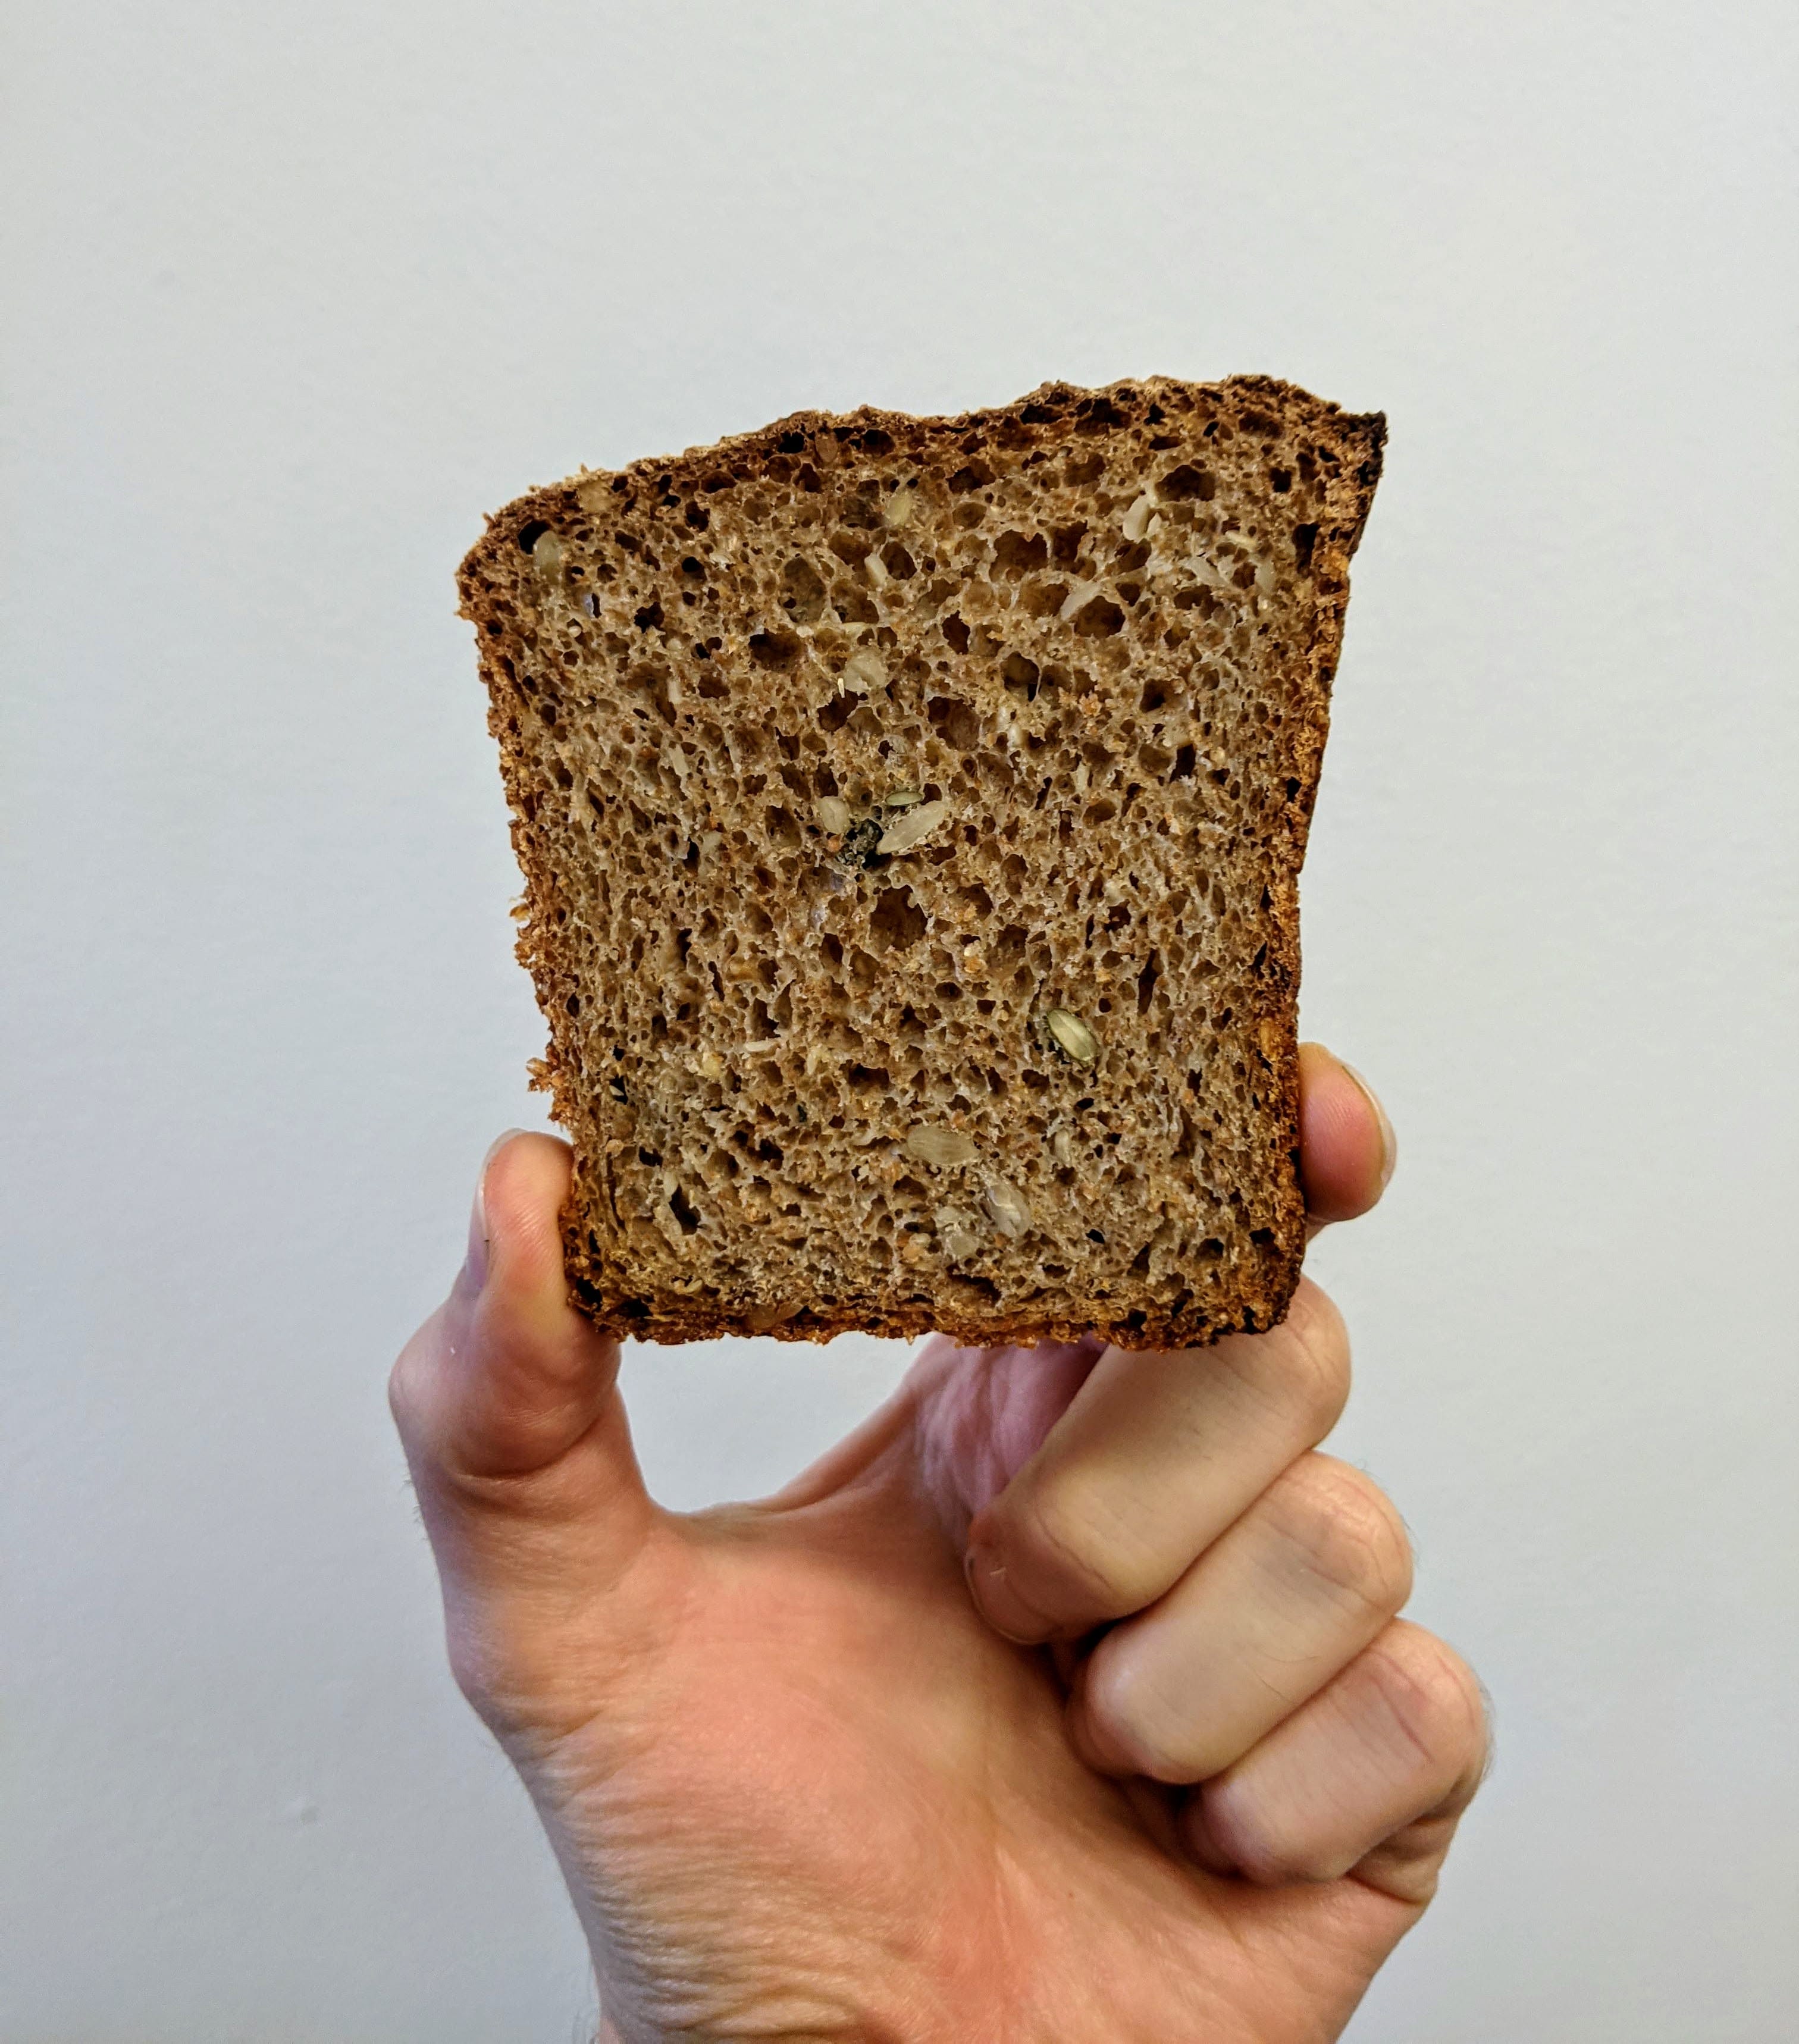 An image of a bread called “Hartog Volkoren with an Open Crumb”